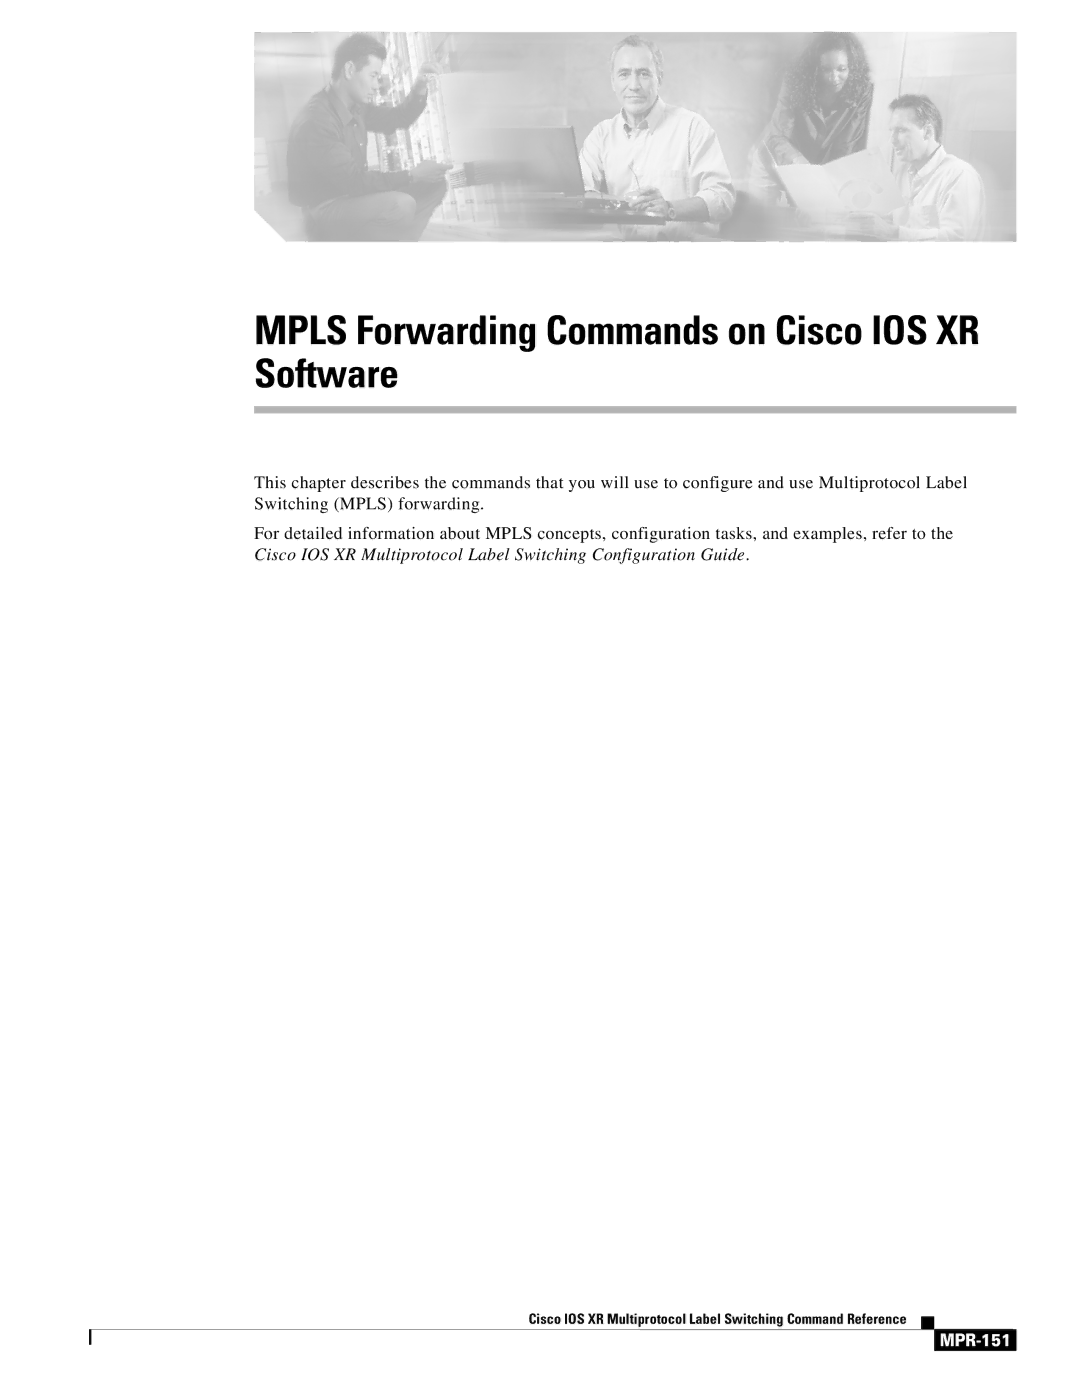 Cisco Systems MPR-151 manual Mpls Forwarding Commands on Cisco IOS XR Software 